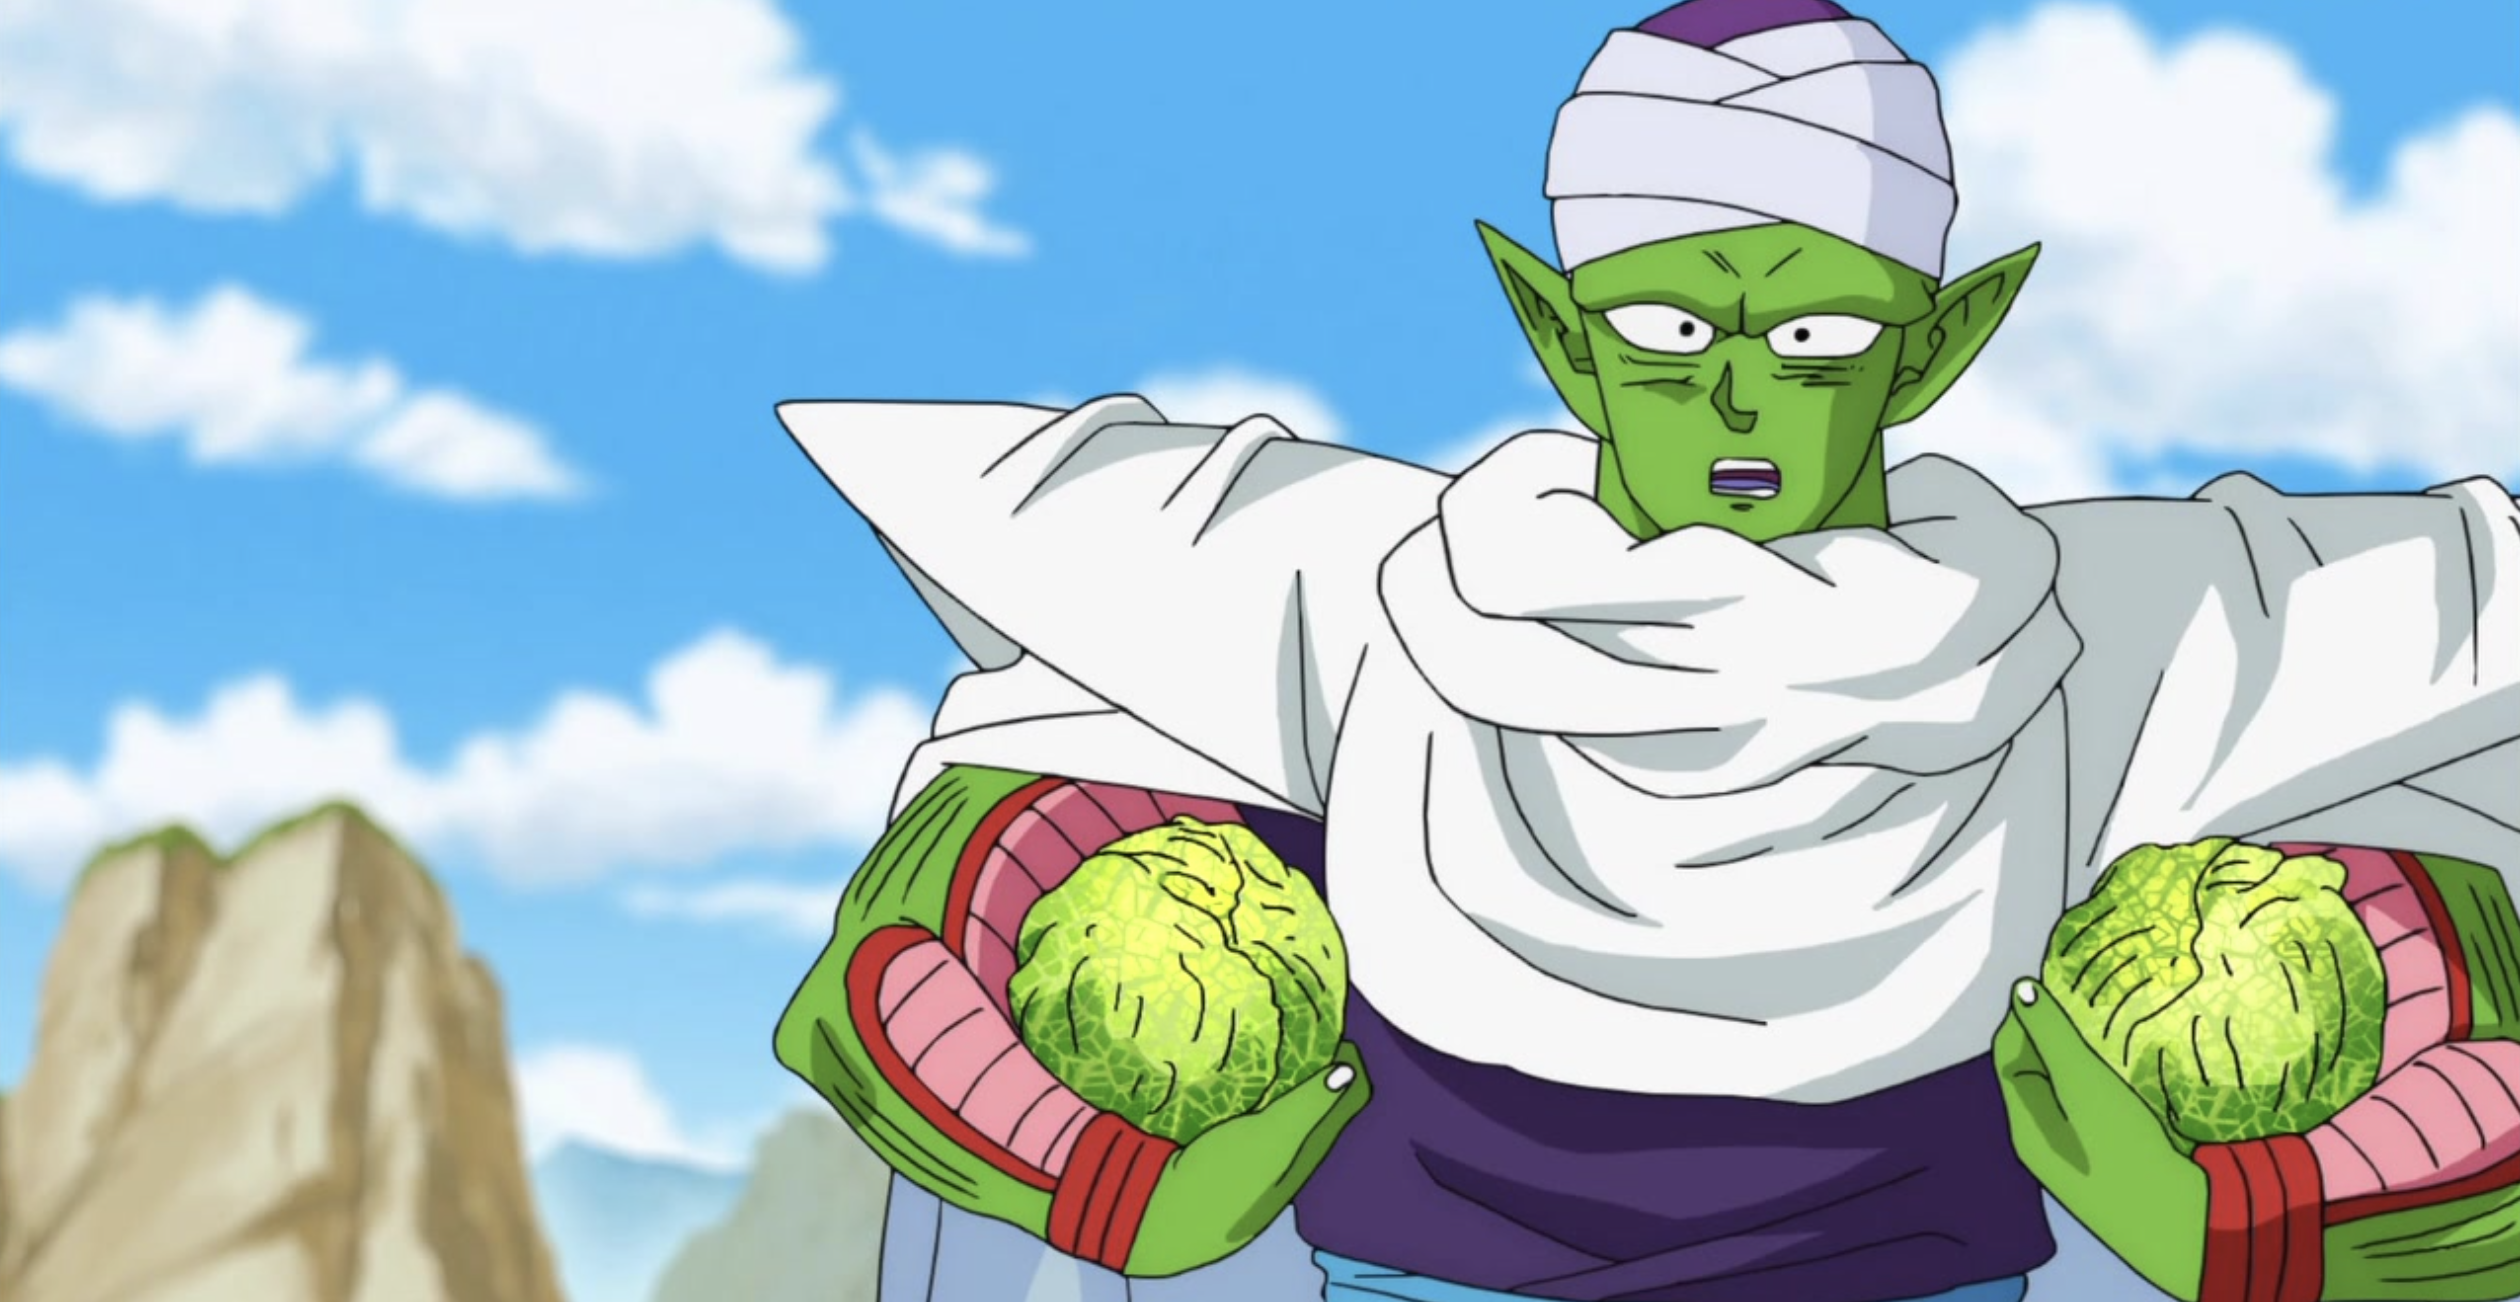 Dragon Ball Super Episode 47 Review: SOS from the Future! A Dark New Enemy  Appears!!